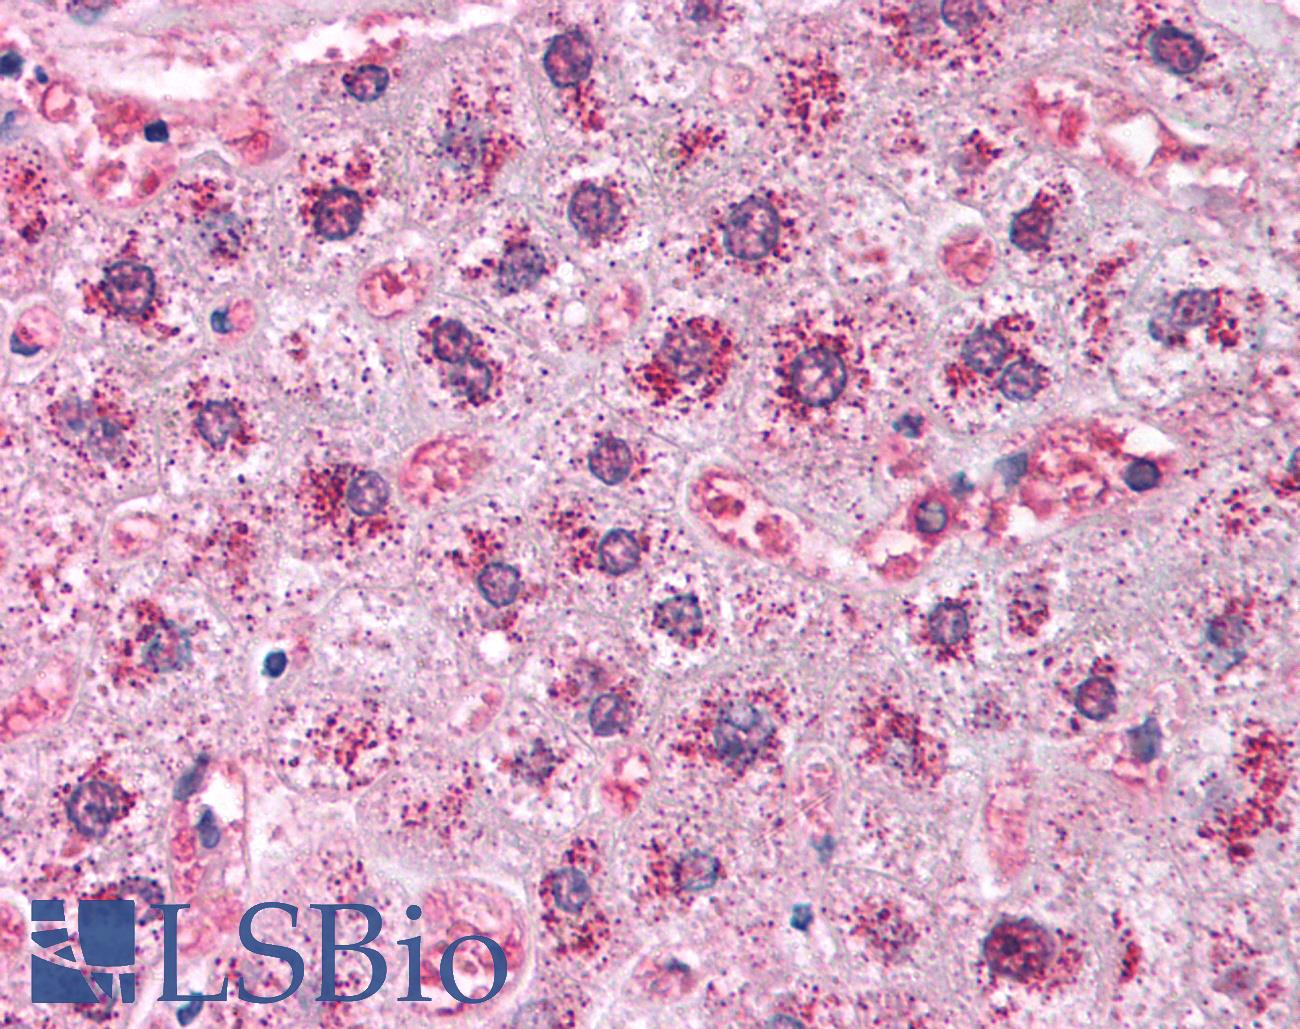 CAT / Catalase Antibody - Anti-Catalase antibody IHC staining of human liver. Immunohistochemistry of formalin-fixed, paraffin-embedded tissue after heat-induced antigen retrieval. Antibody concentration 5 ug/ml.